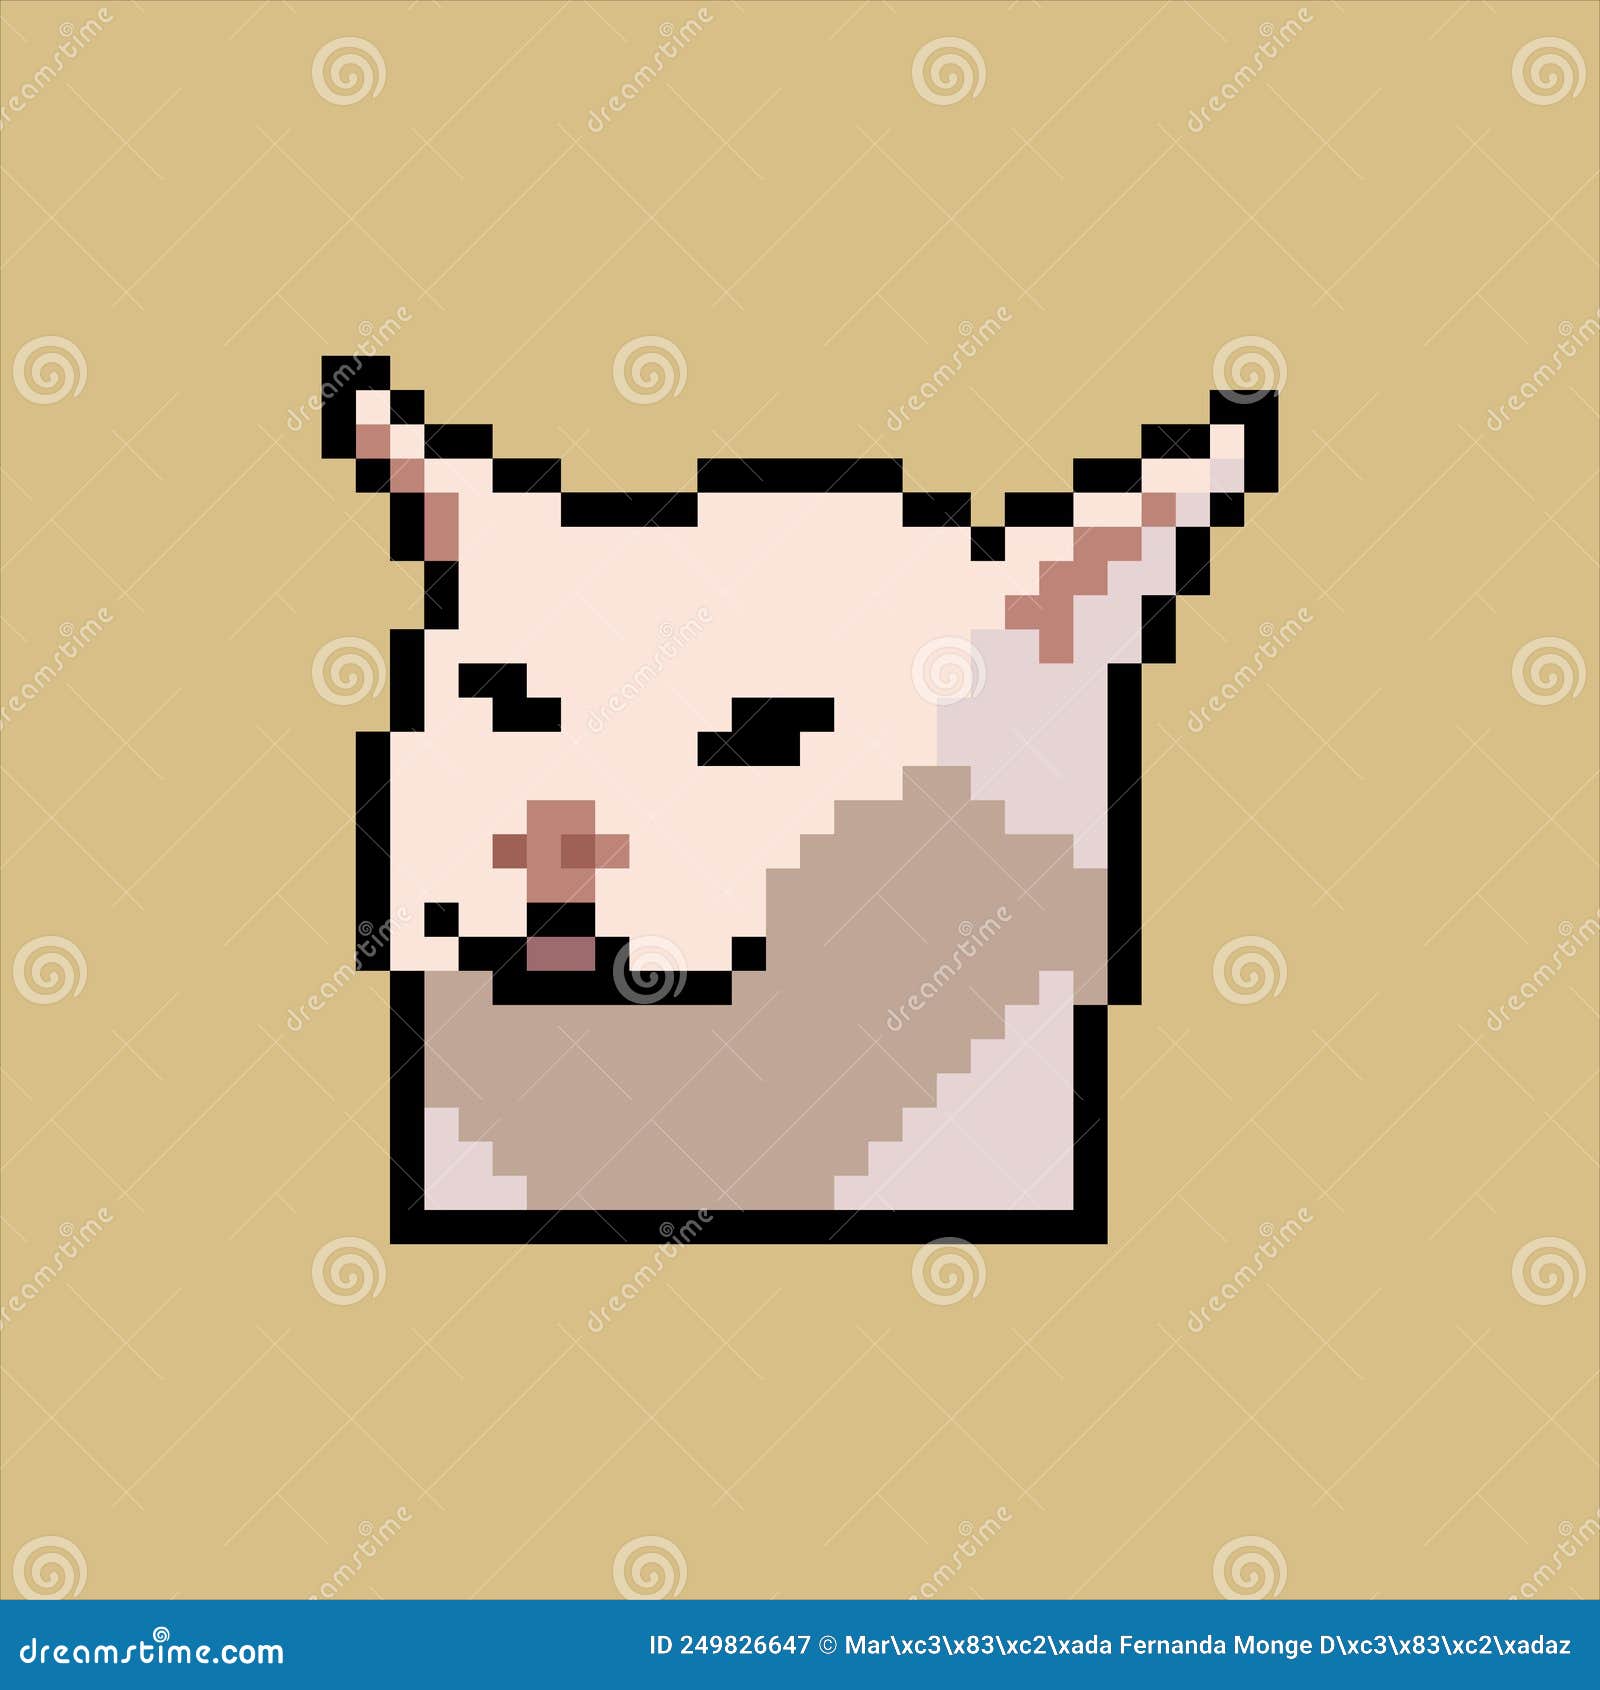 animal pixel art - pictures, memes and posts on JoyReactor